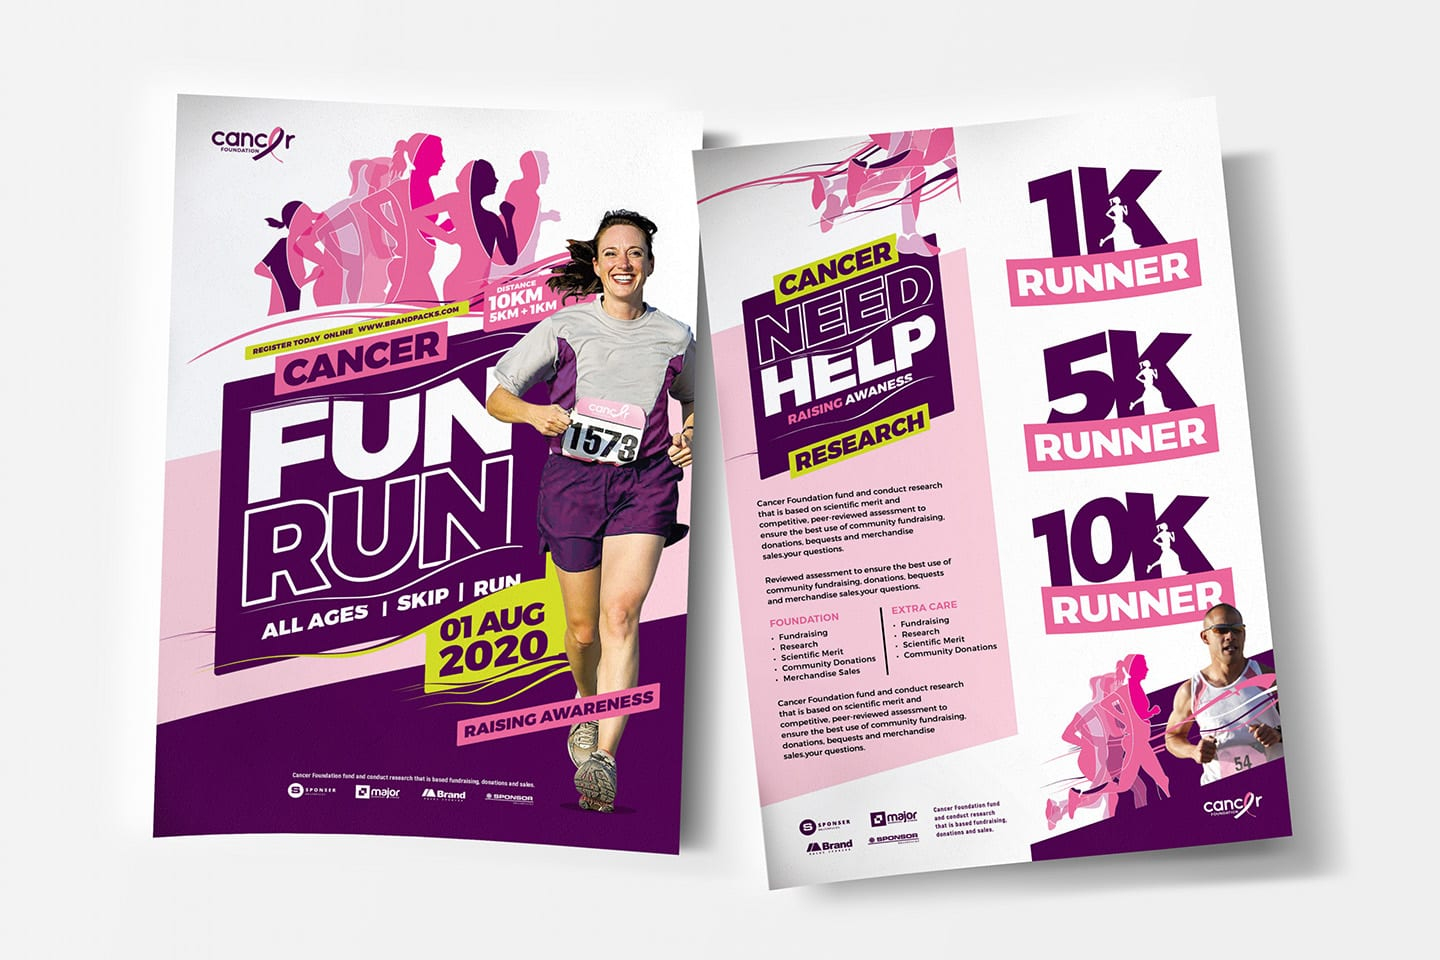 Cancer Charity Fun Run Templates Pack by BrandPacks - BrandPacks For Fun Run Flyer Template For Fun Run Flyer Template